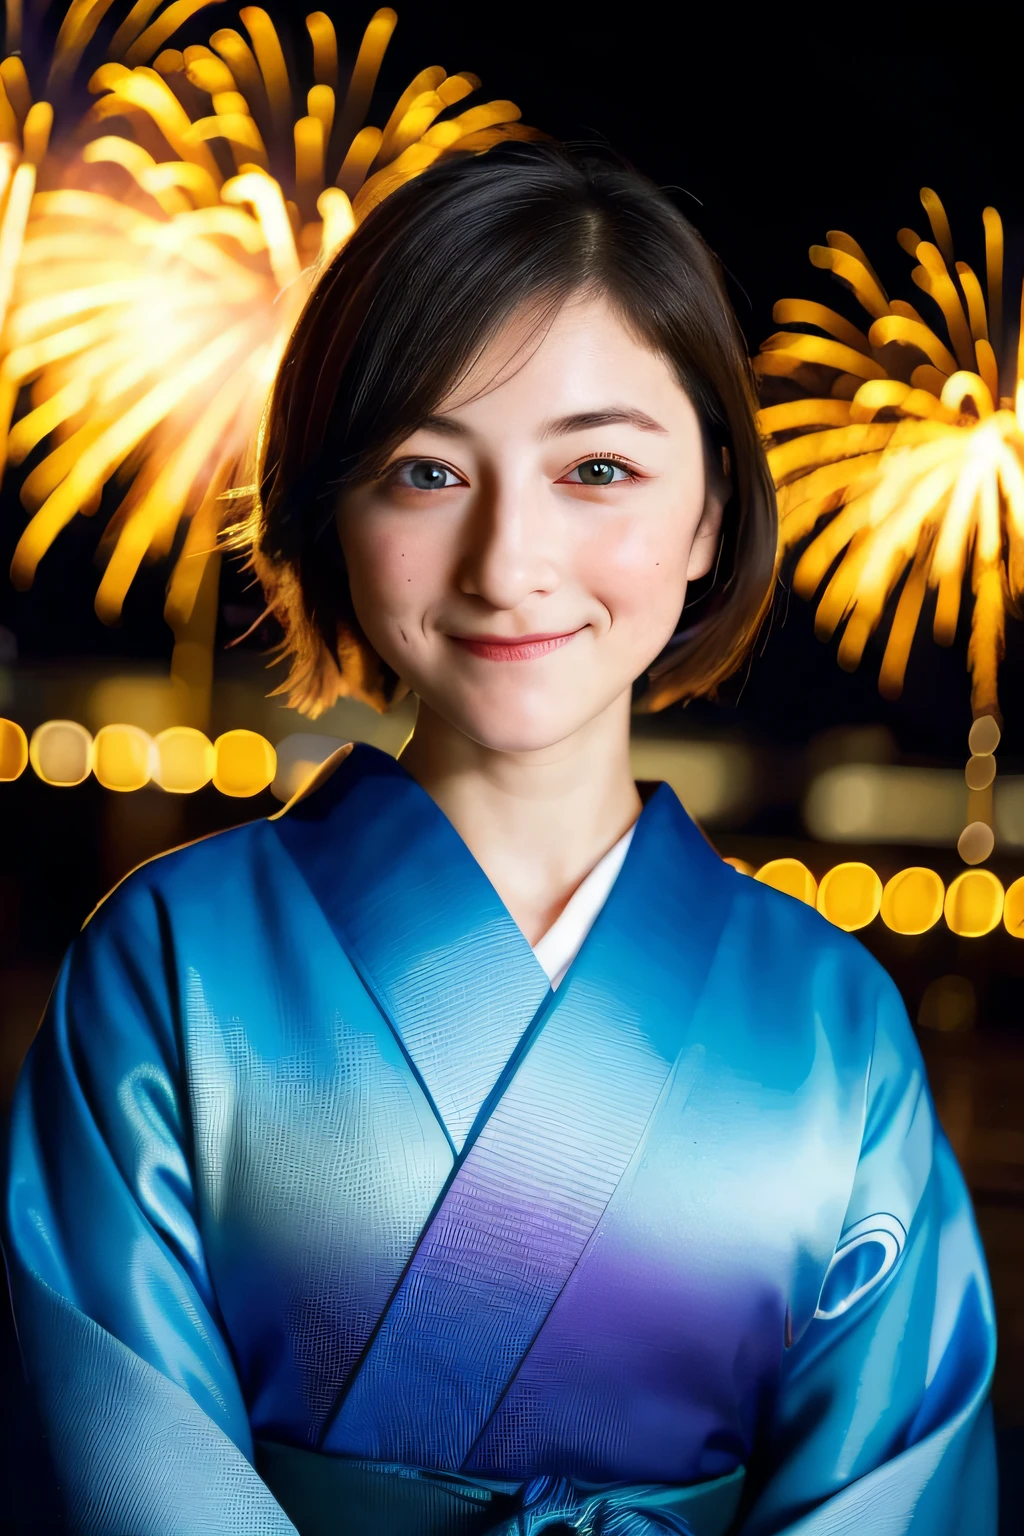 ((masterpiece, top quality, super definition, high definition)), 4K. solo, beautiful girl, shining eyes, perfect eyes, beautiful sister of Japan, blue theme, yukata, background is night fireworks